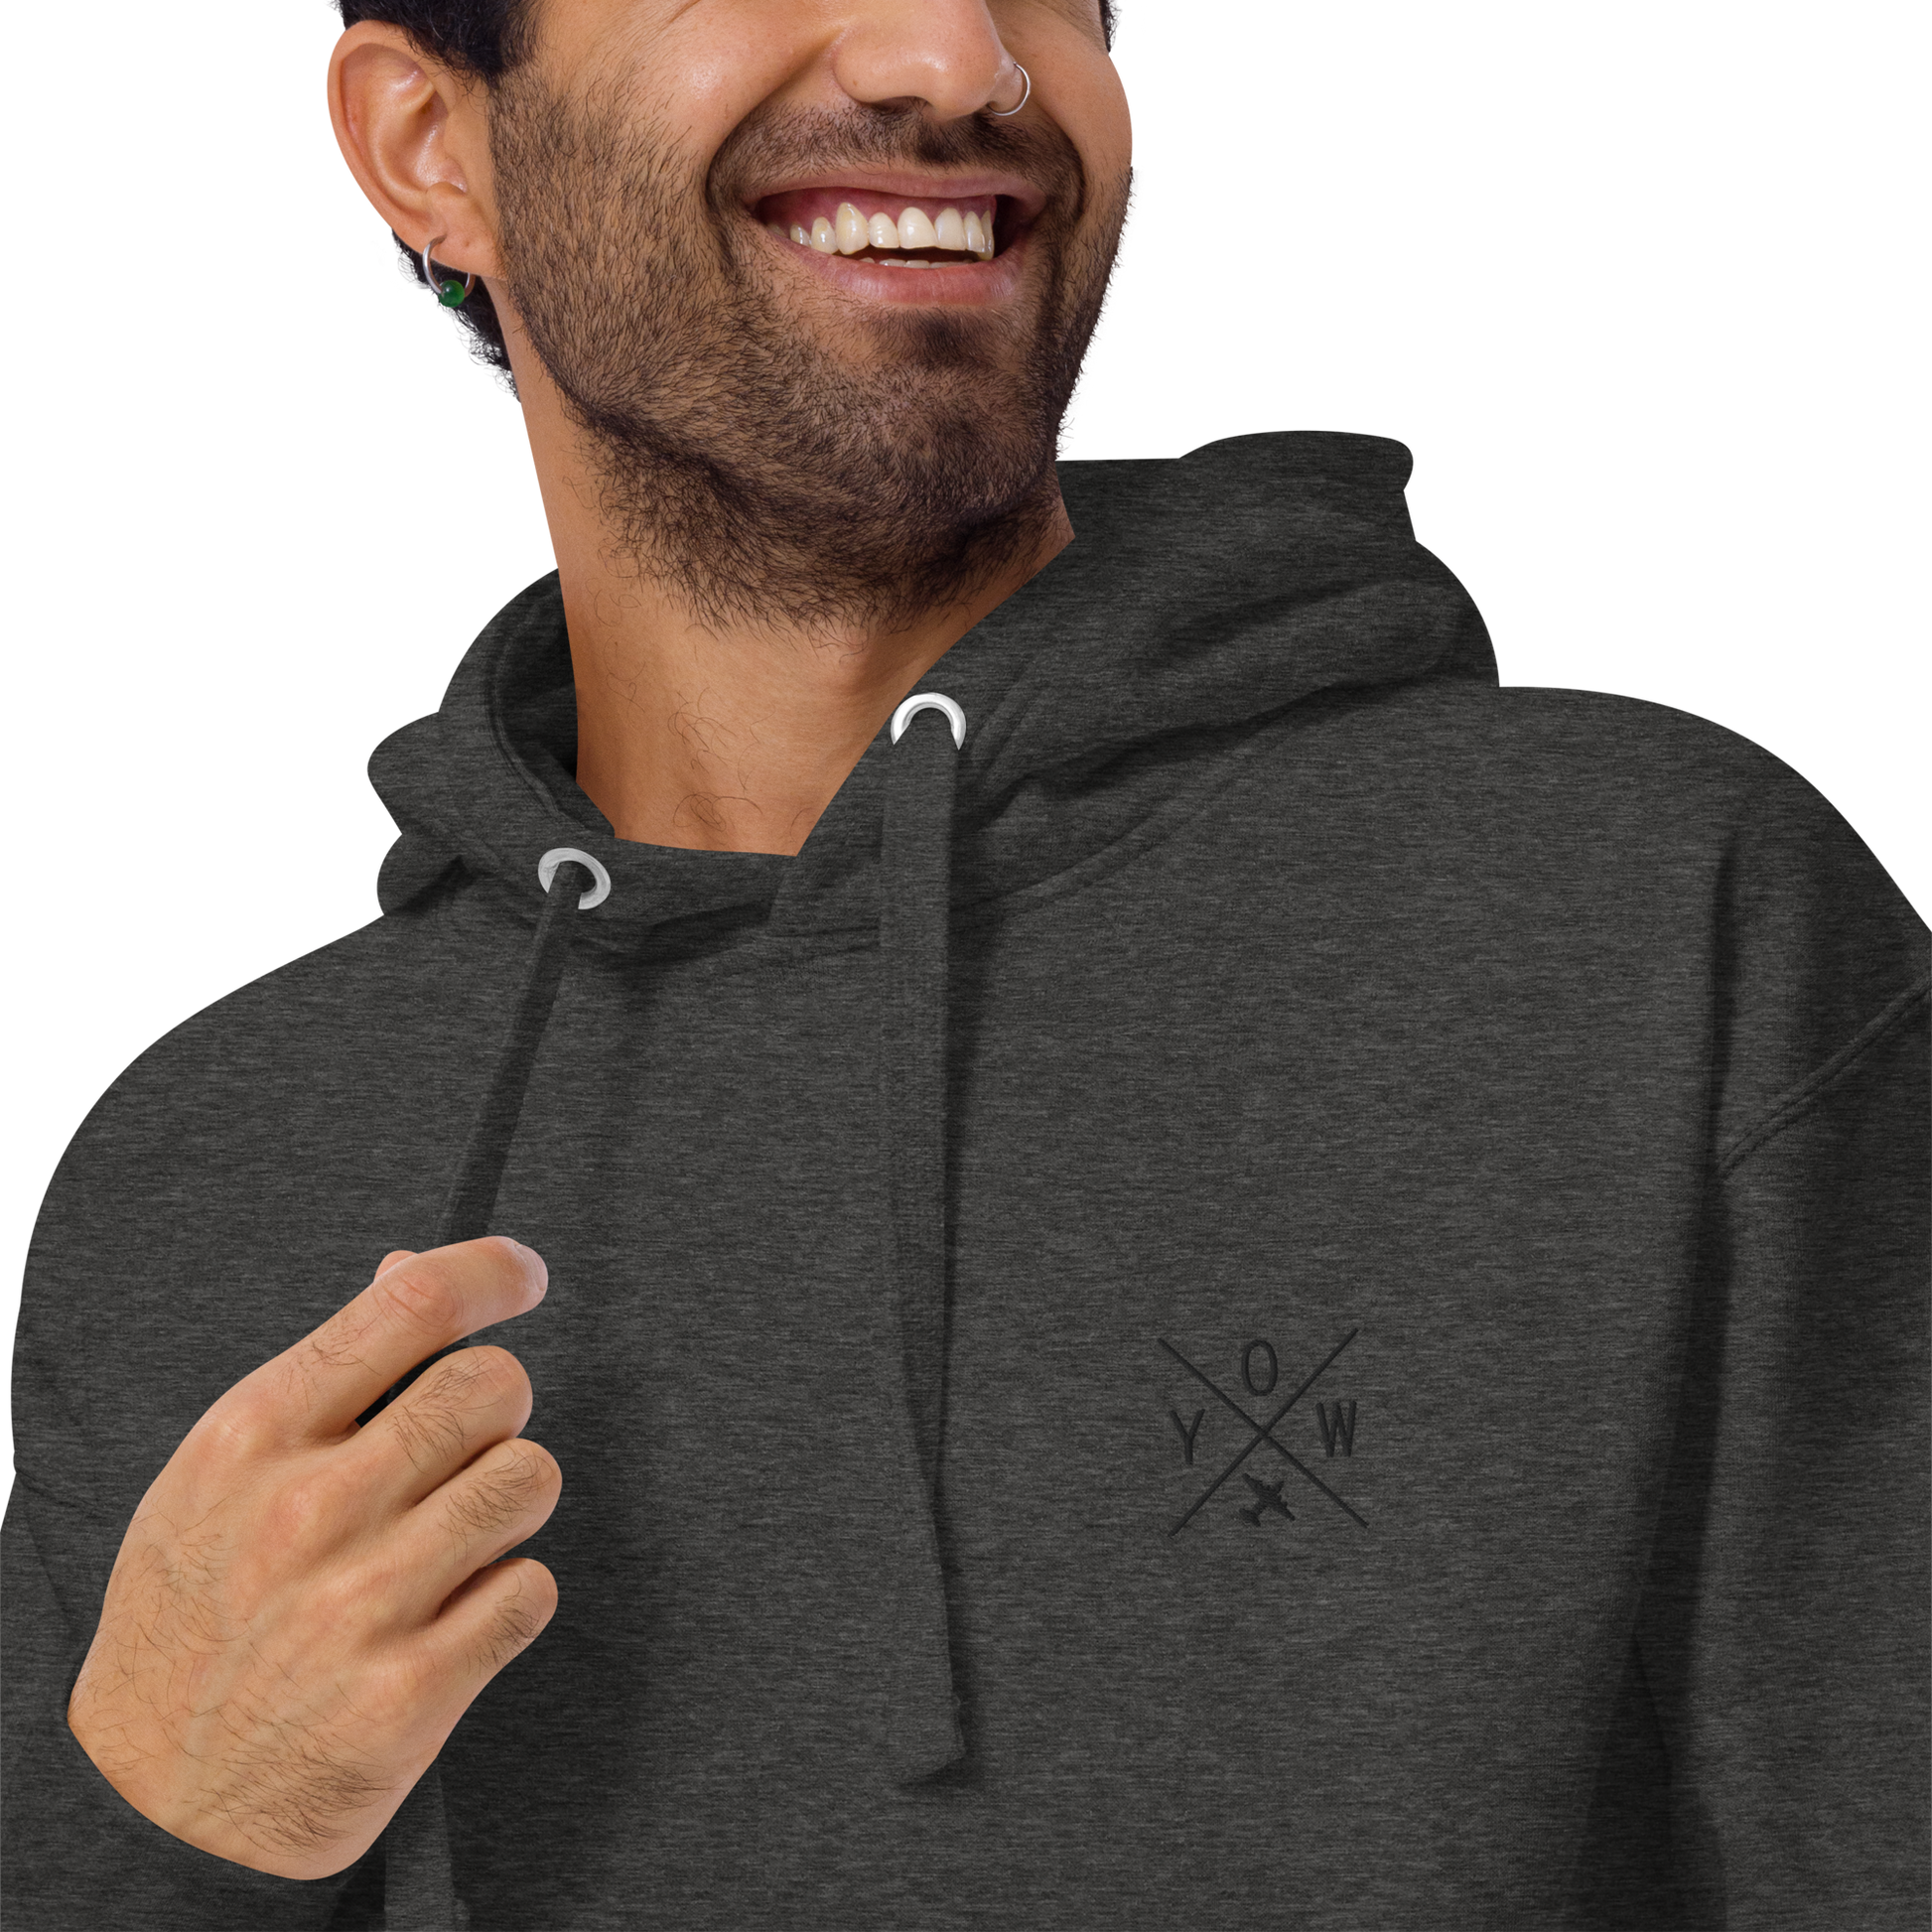 YHM Designs - YOW Ottawa Premium Hoodie - Crossed-X Design with Airport Code and Vintage Propliner - Black Embroidery - Image 12